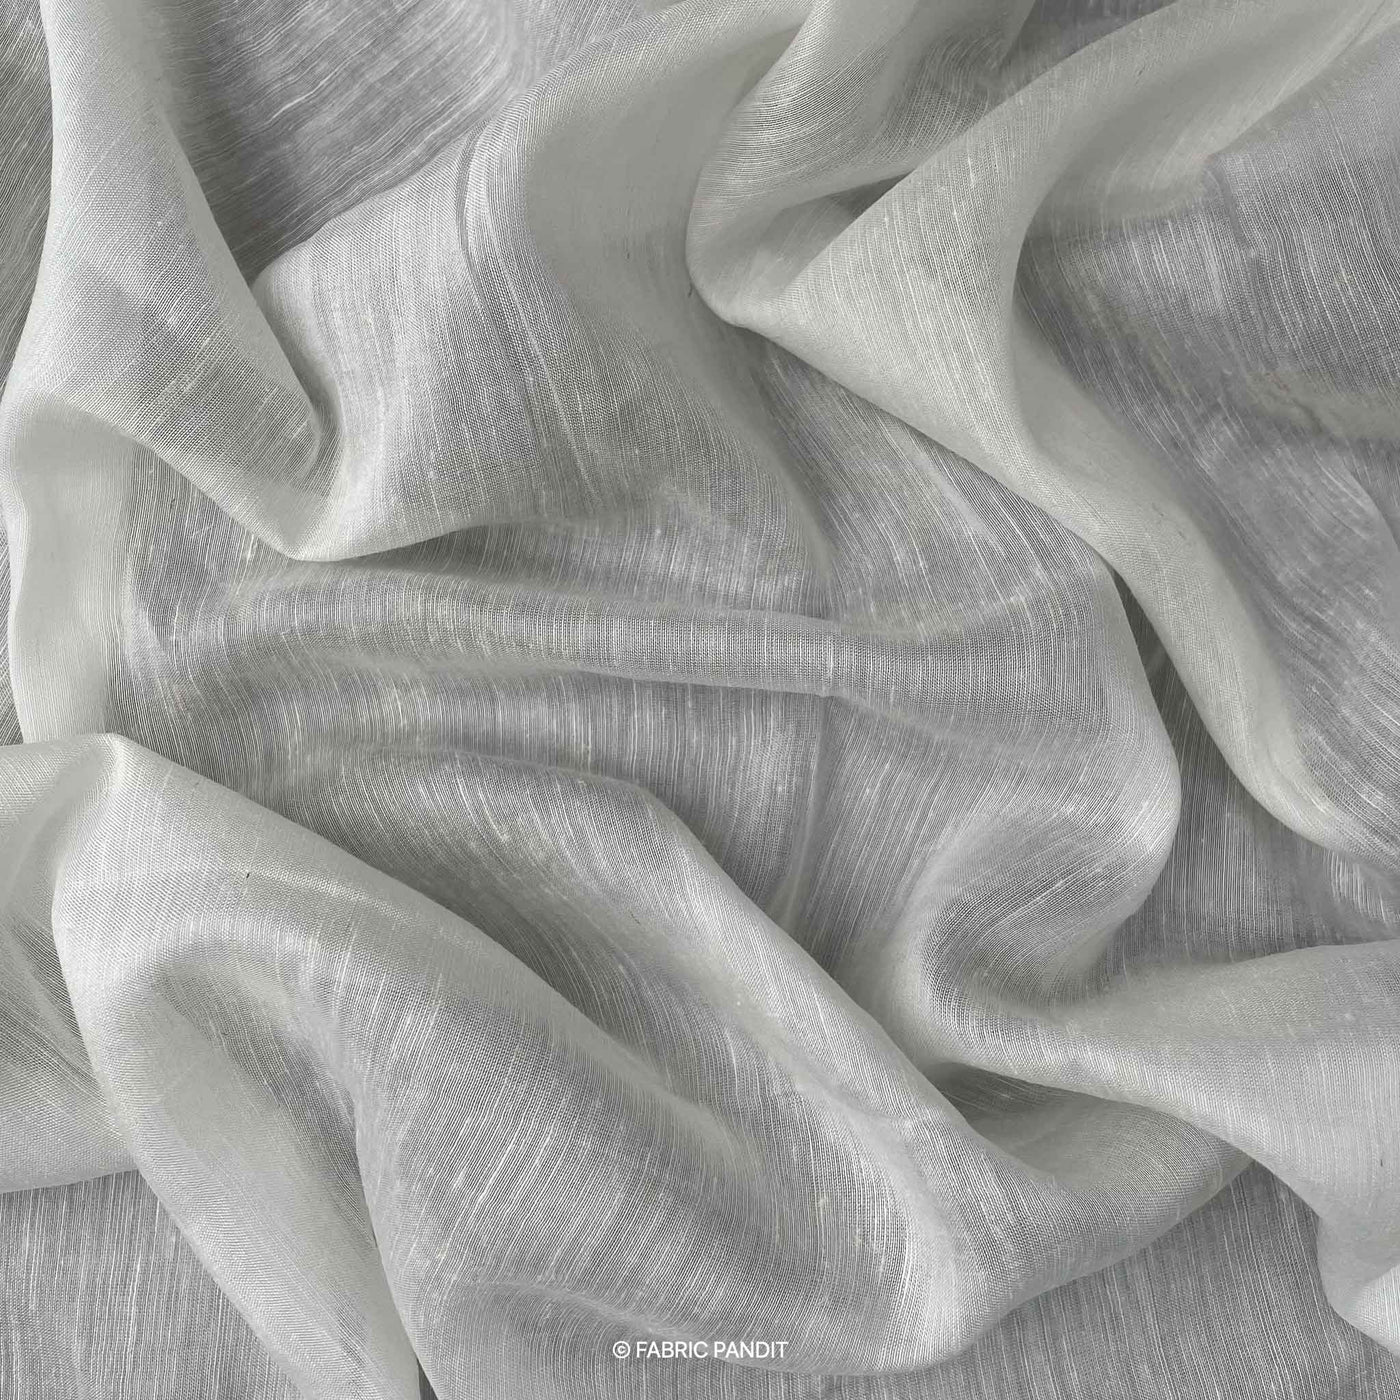 Fabric Pandit Fabric White Plain Dyeable Pure Bemberg Silk Linen Fabric (Width 44 inches)